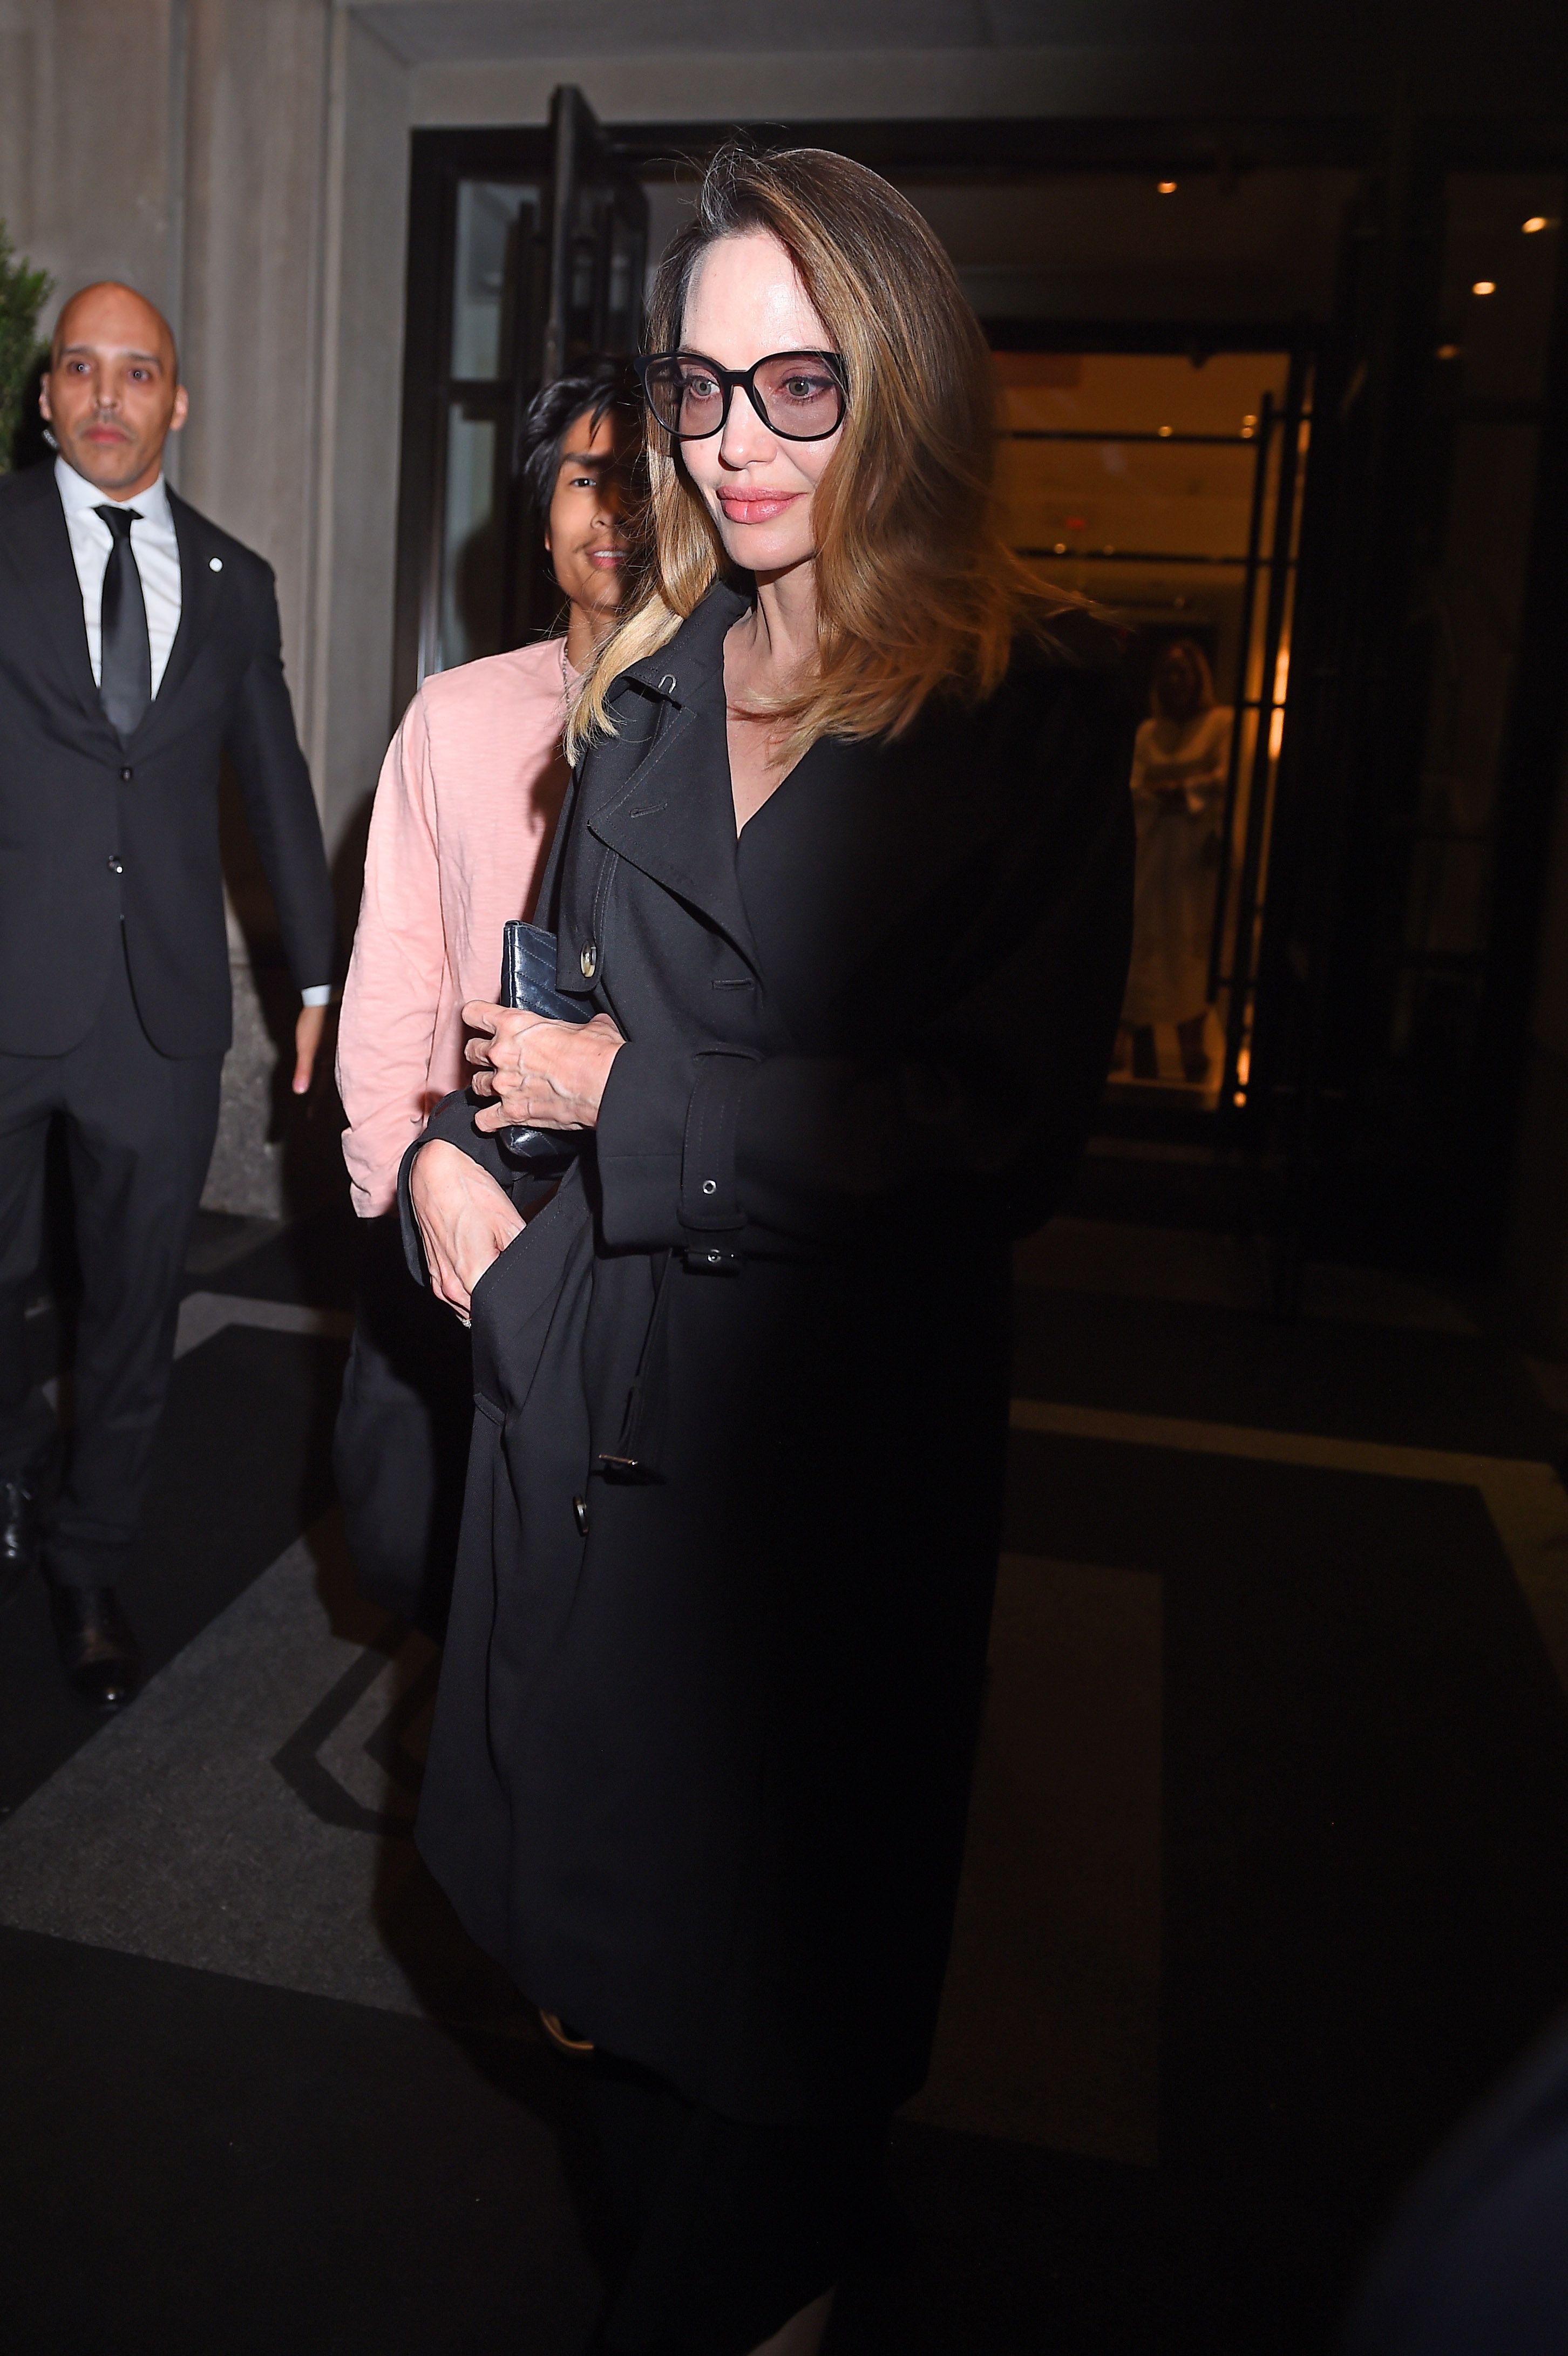 Angelina Jolie Bares Skin in Long Black Strapless Dress at WSJ Event –  Shoes Post